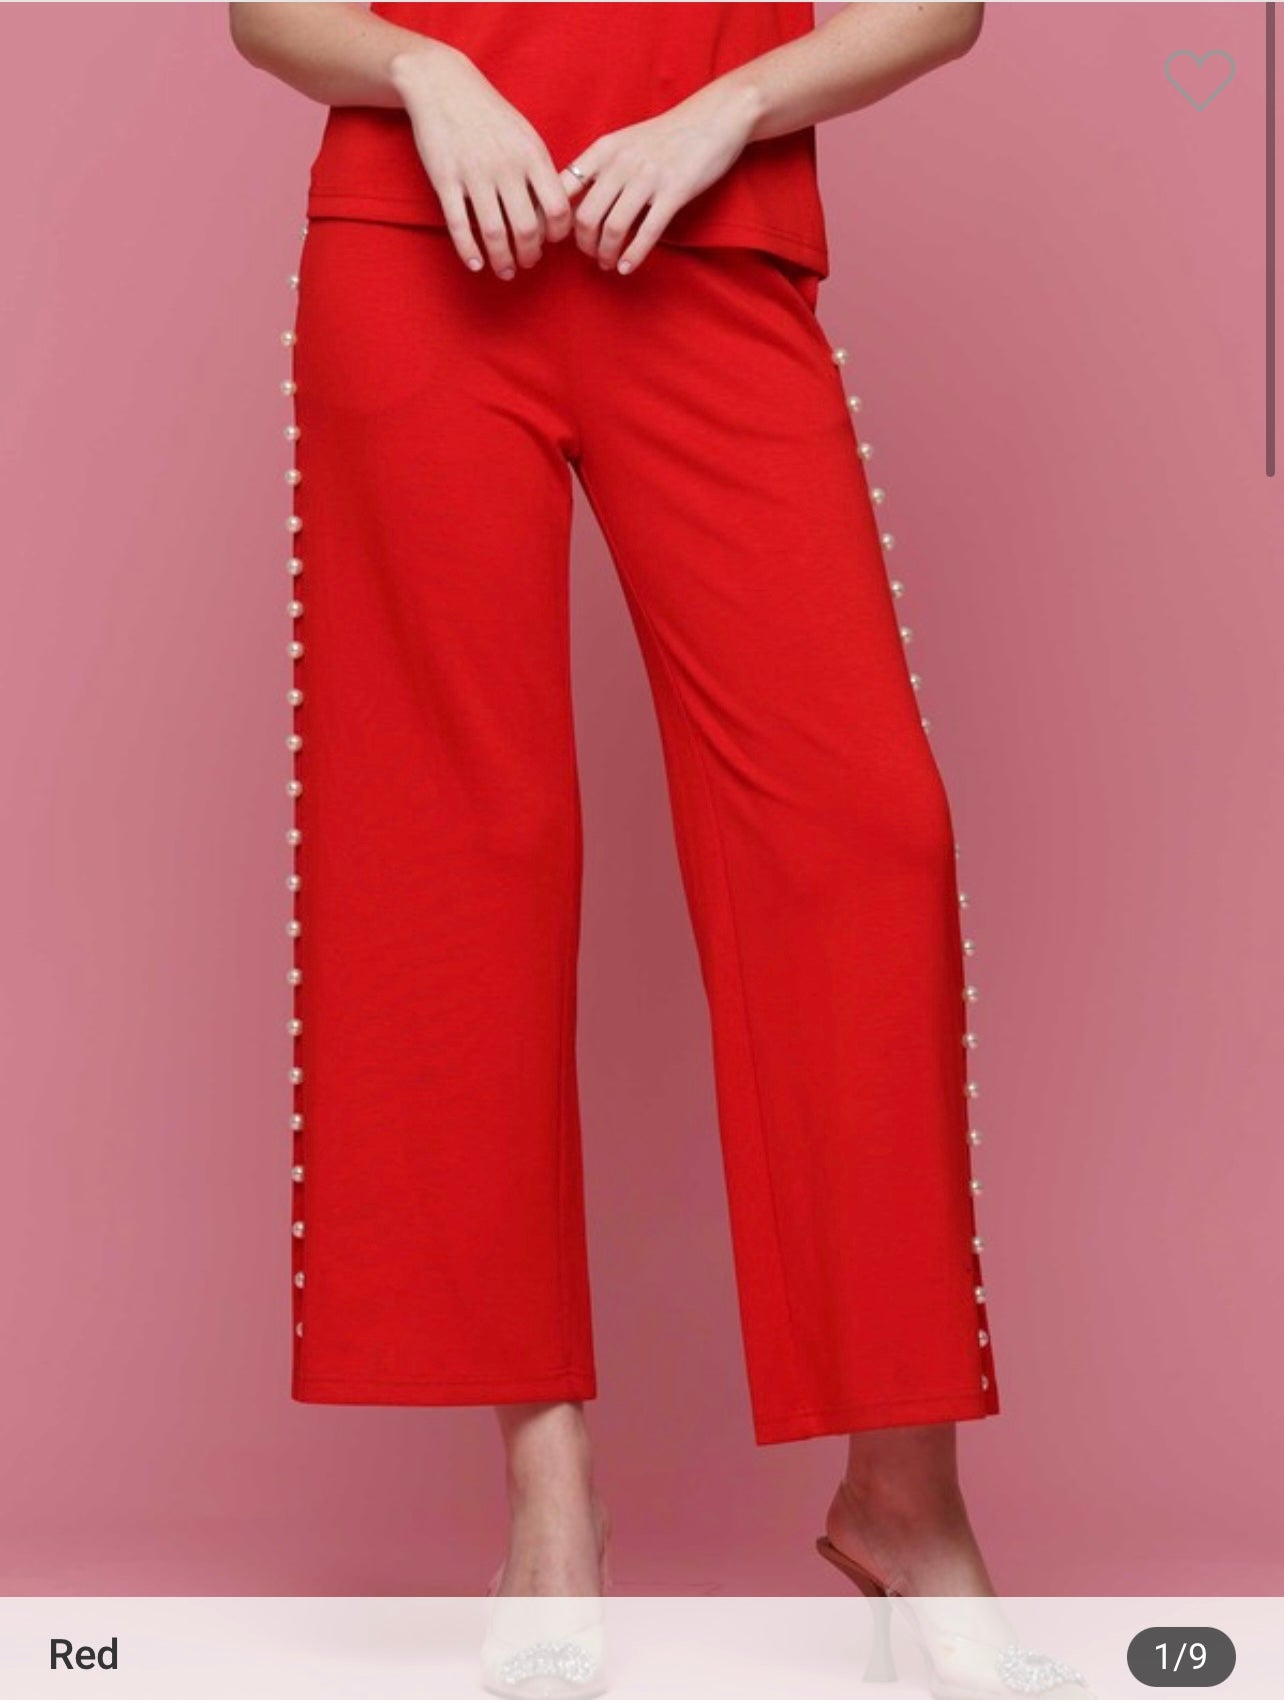 Red pants with pearls